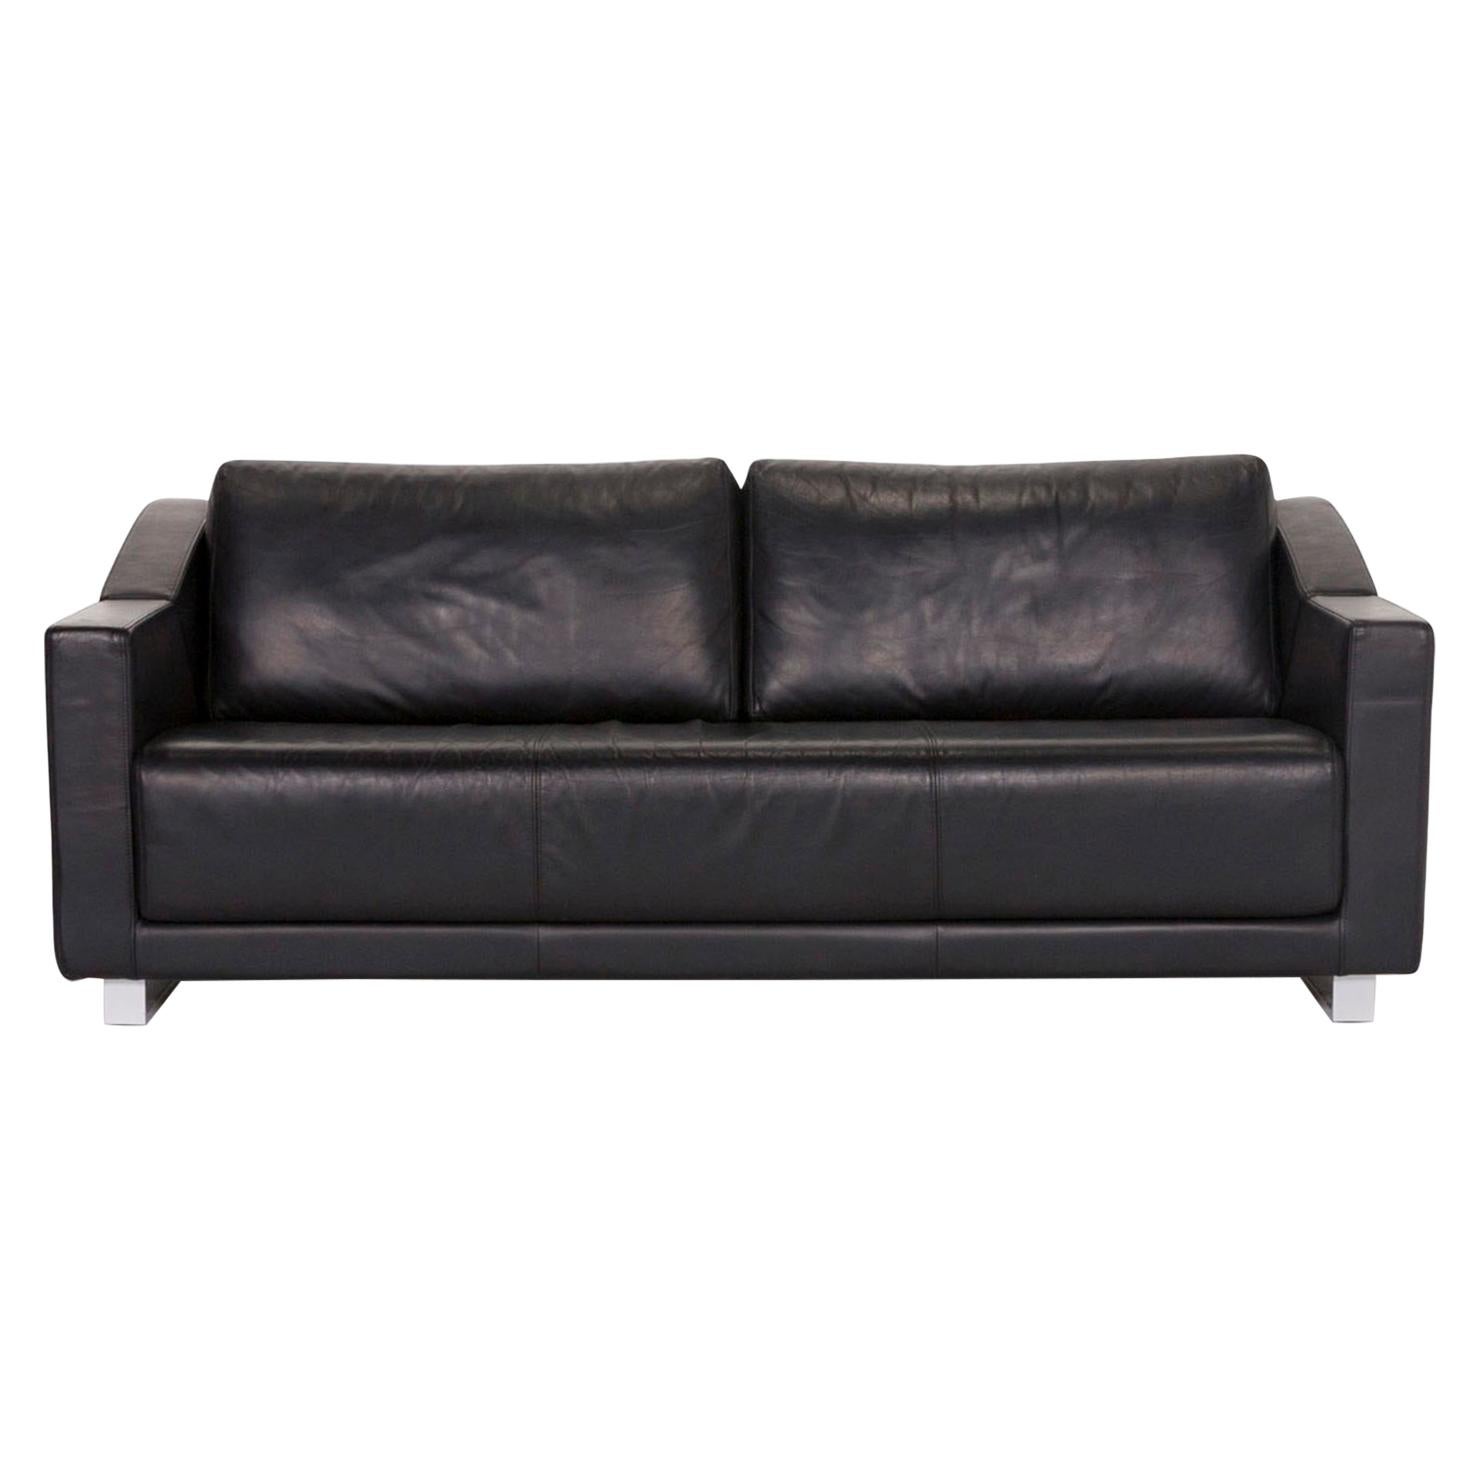 Rolf Benz 350 Leather Sofa Set Black Three-Seat Couch